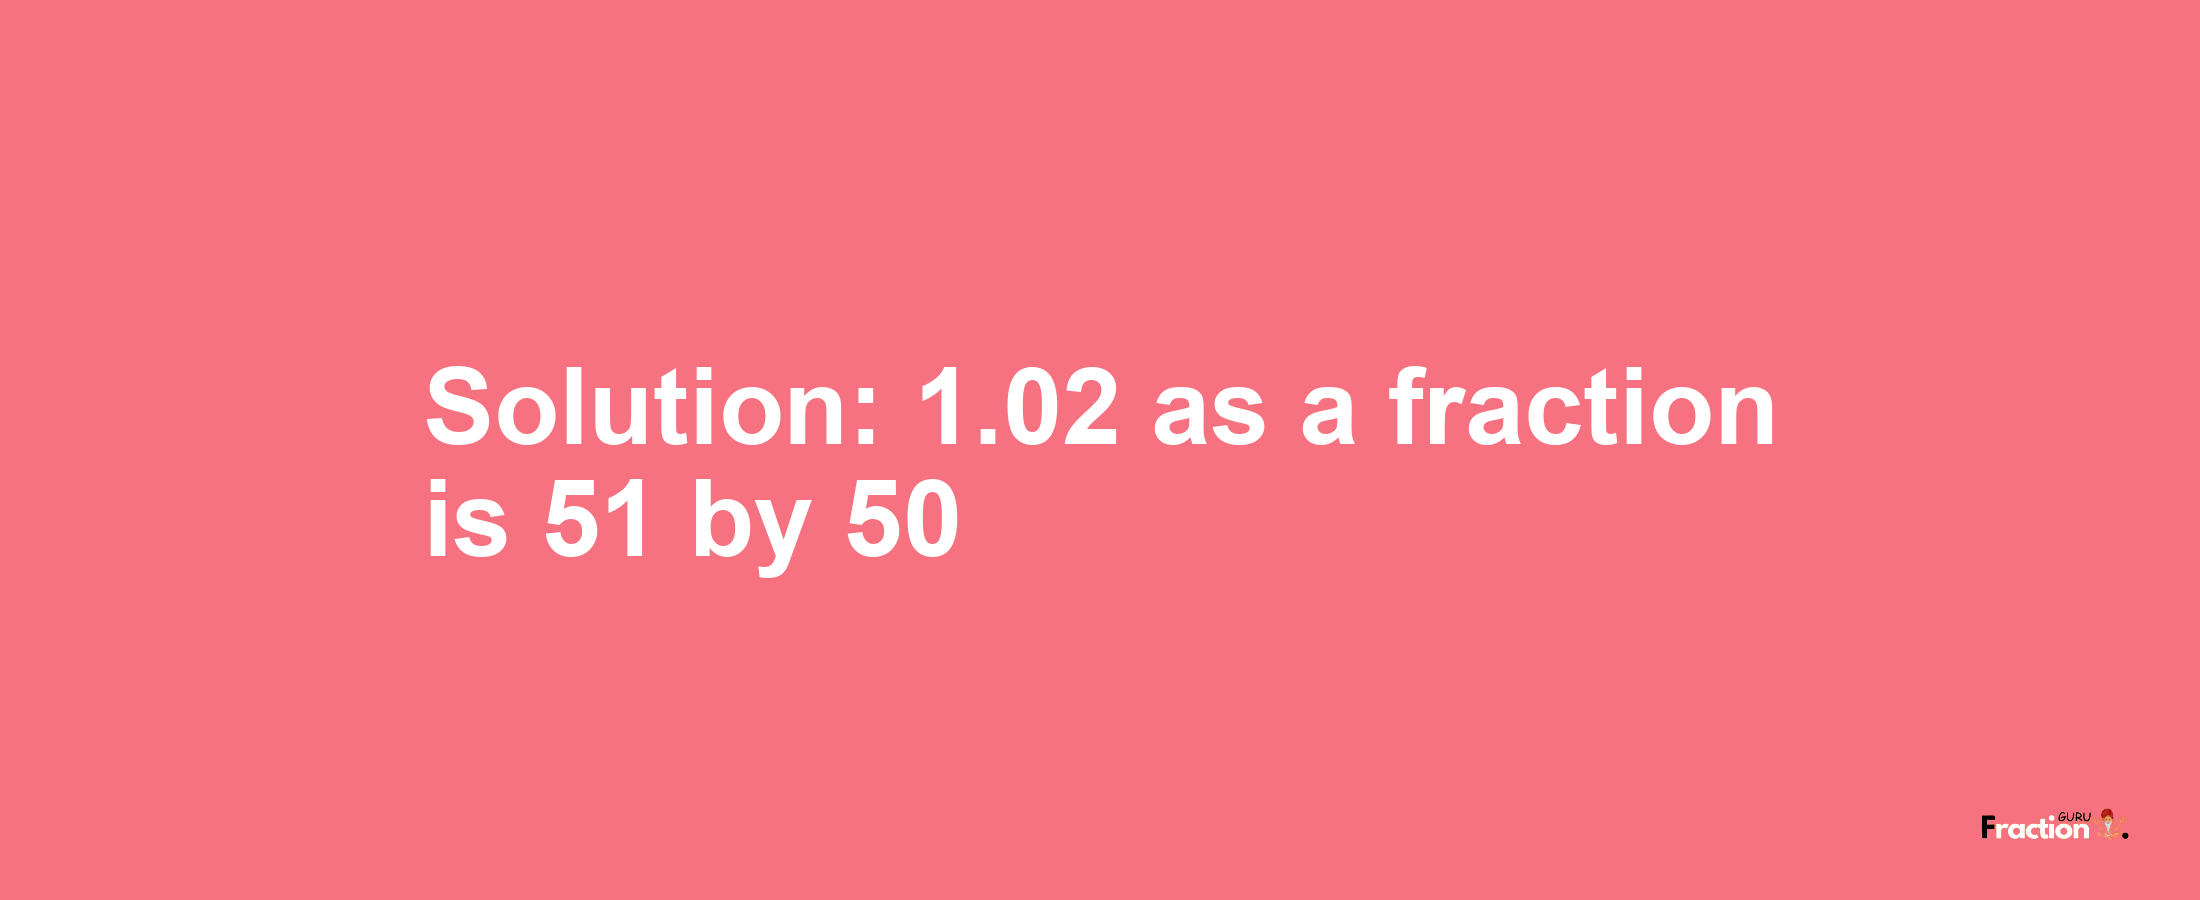 Solution:1.02 as a fraction is 51/50